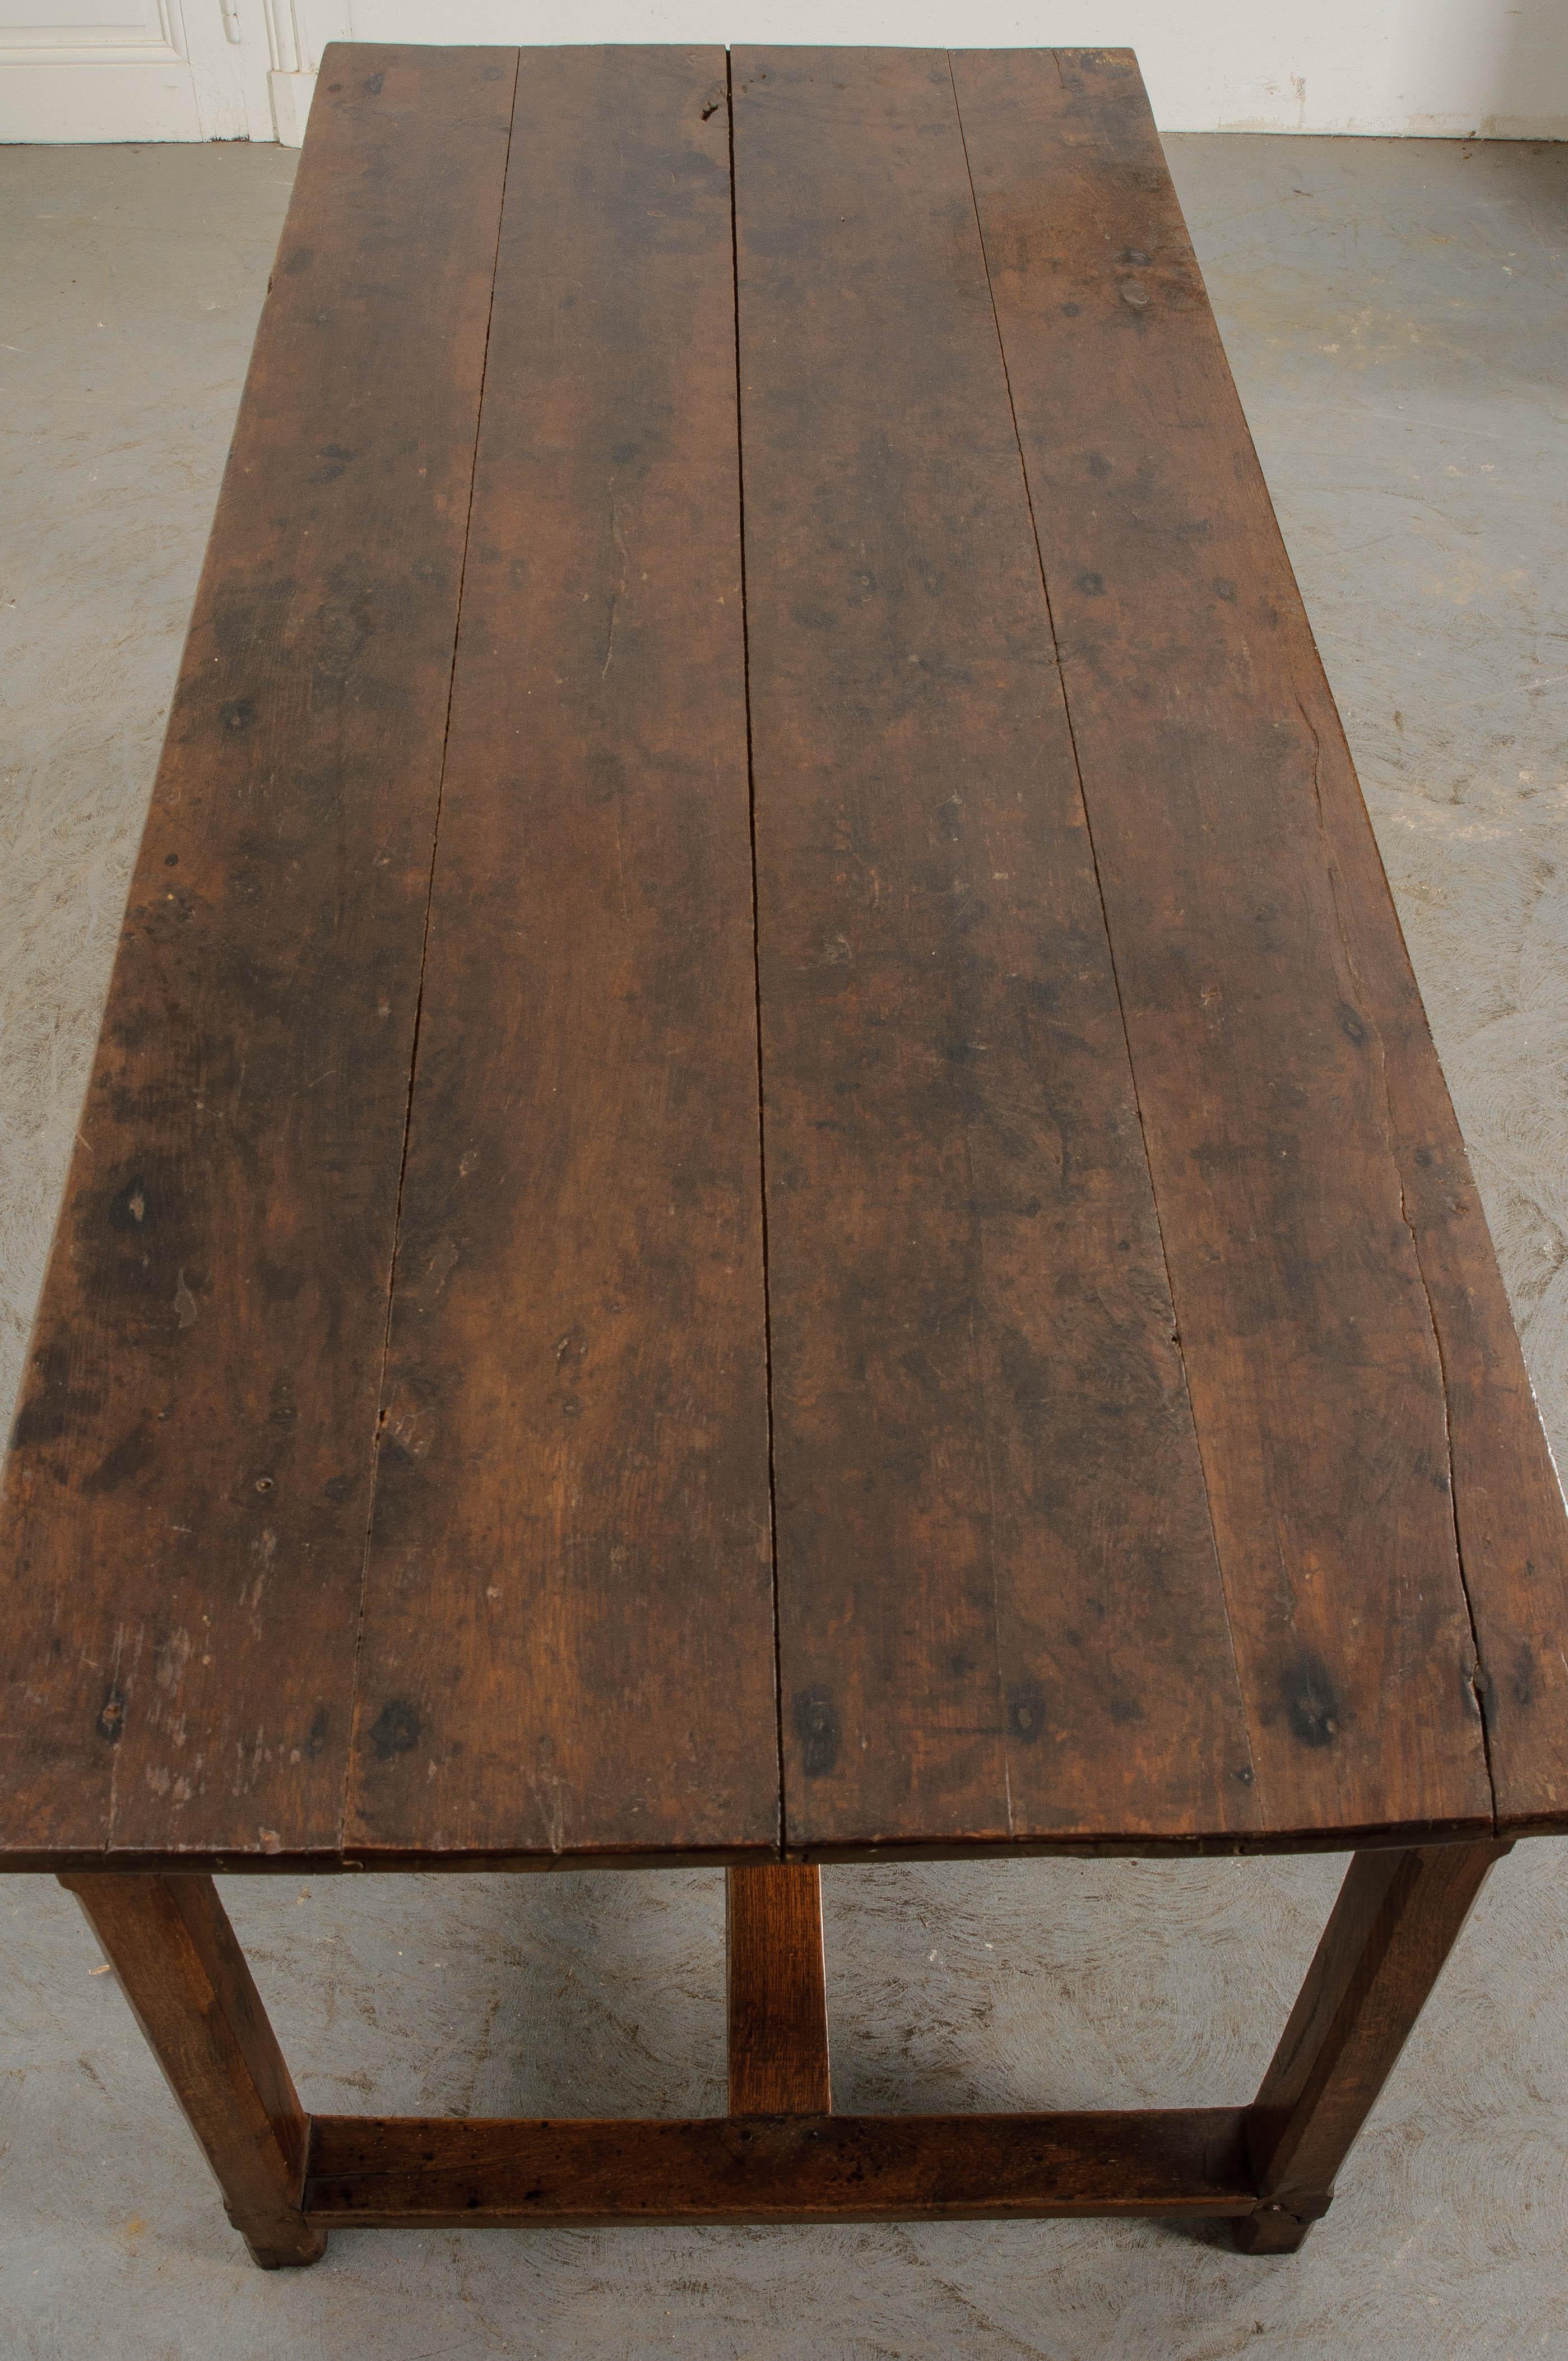 This fine 19th century solid-oak table, constructed using impeccable peg joinery, has a rich, deep finish that has gained a beautiful patina over time. The oak is darker in color. The tongue-and-groove plank top is set over an apron which